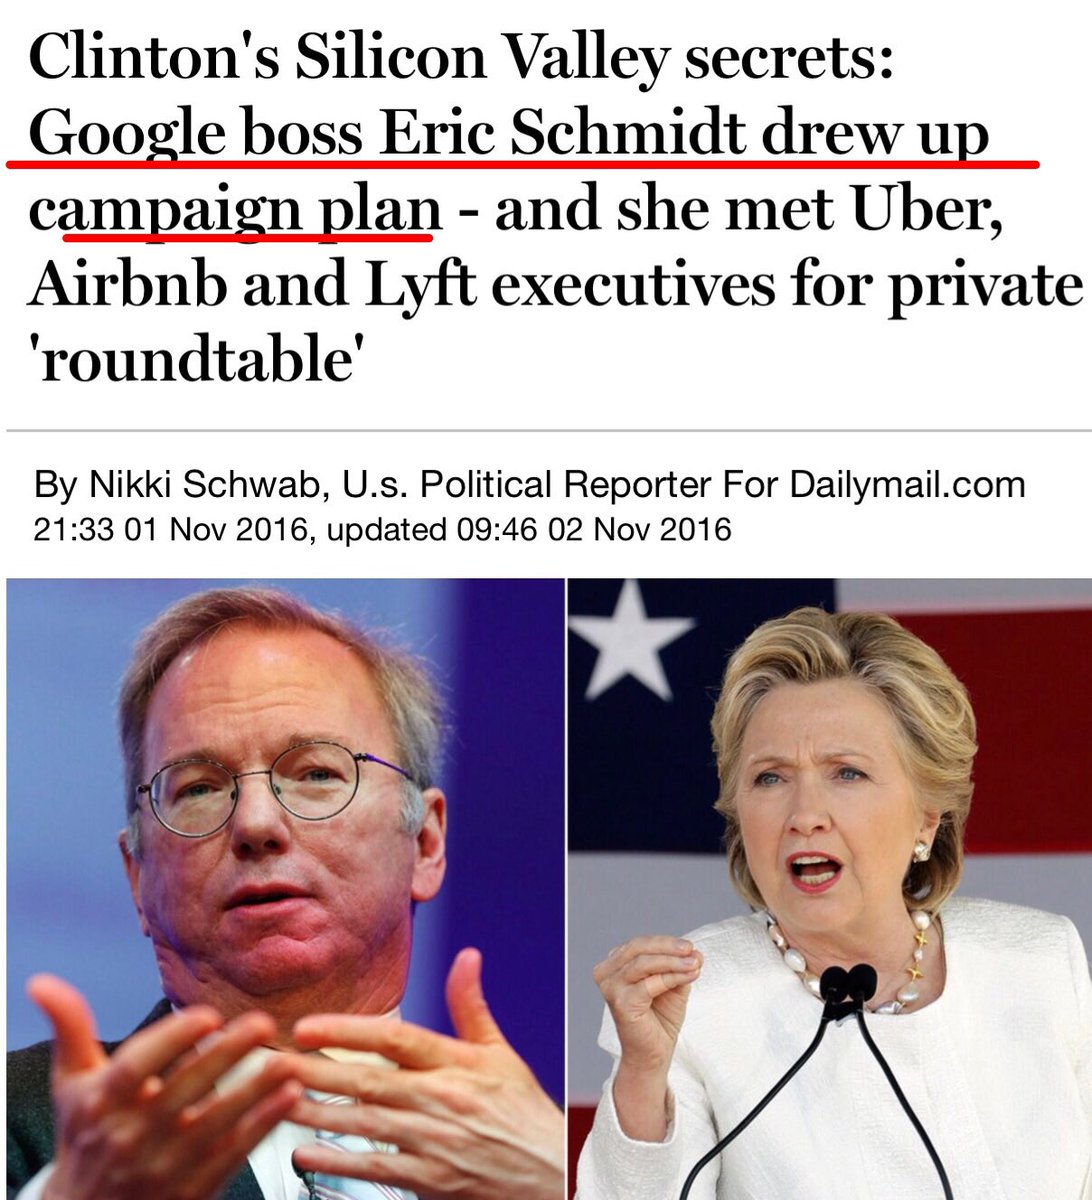 (2)  #Google has a very close relationship with Clinton, it goes all the way back to her days as Secretary of State. Not only did they donate heavily to her campaign they also support the Clinton Foundation. In fact the boss even made her campaign plan.